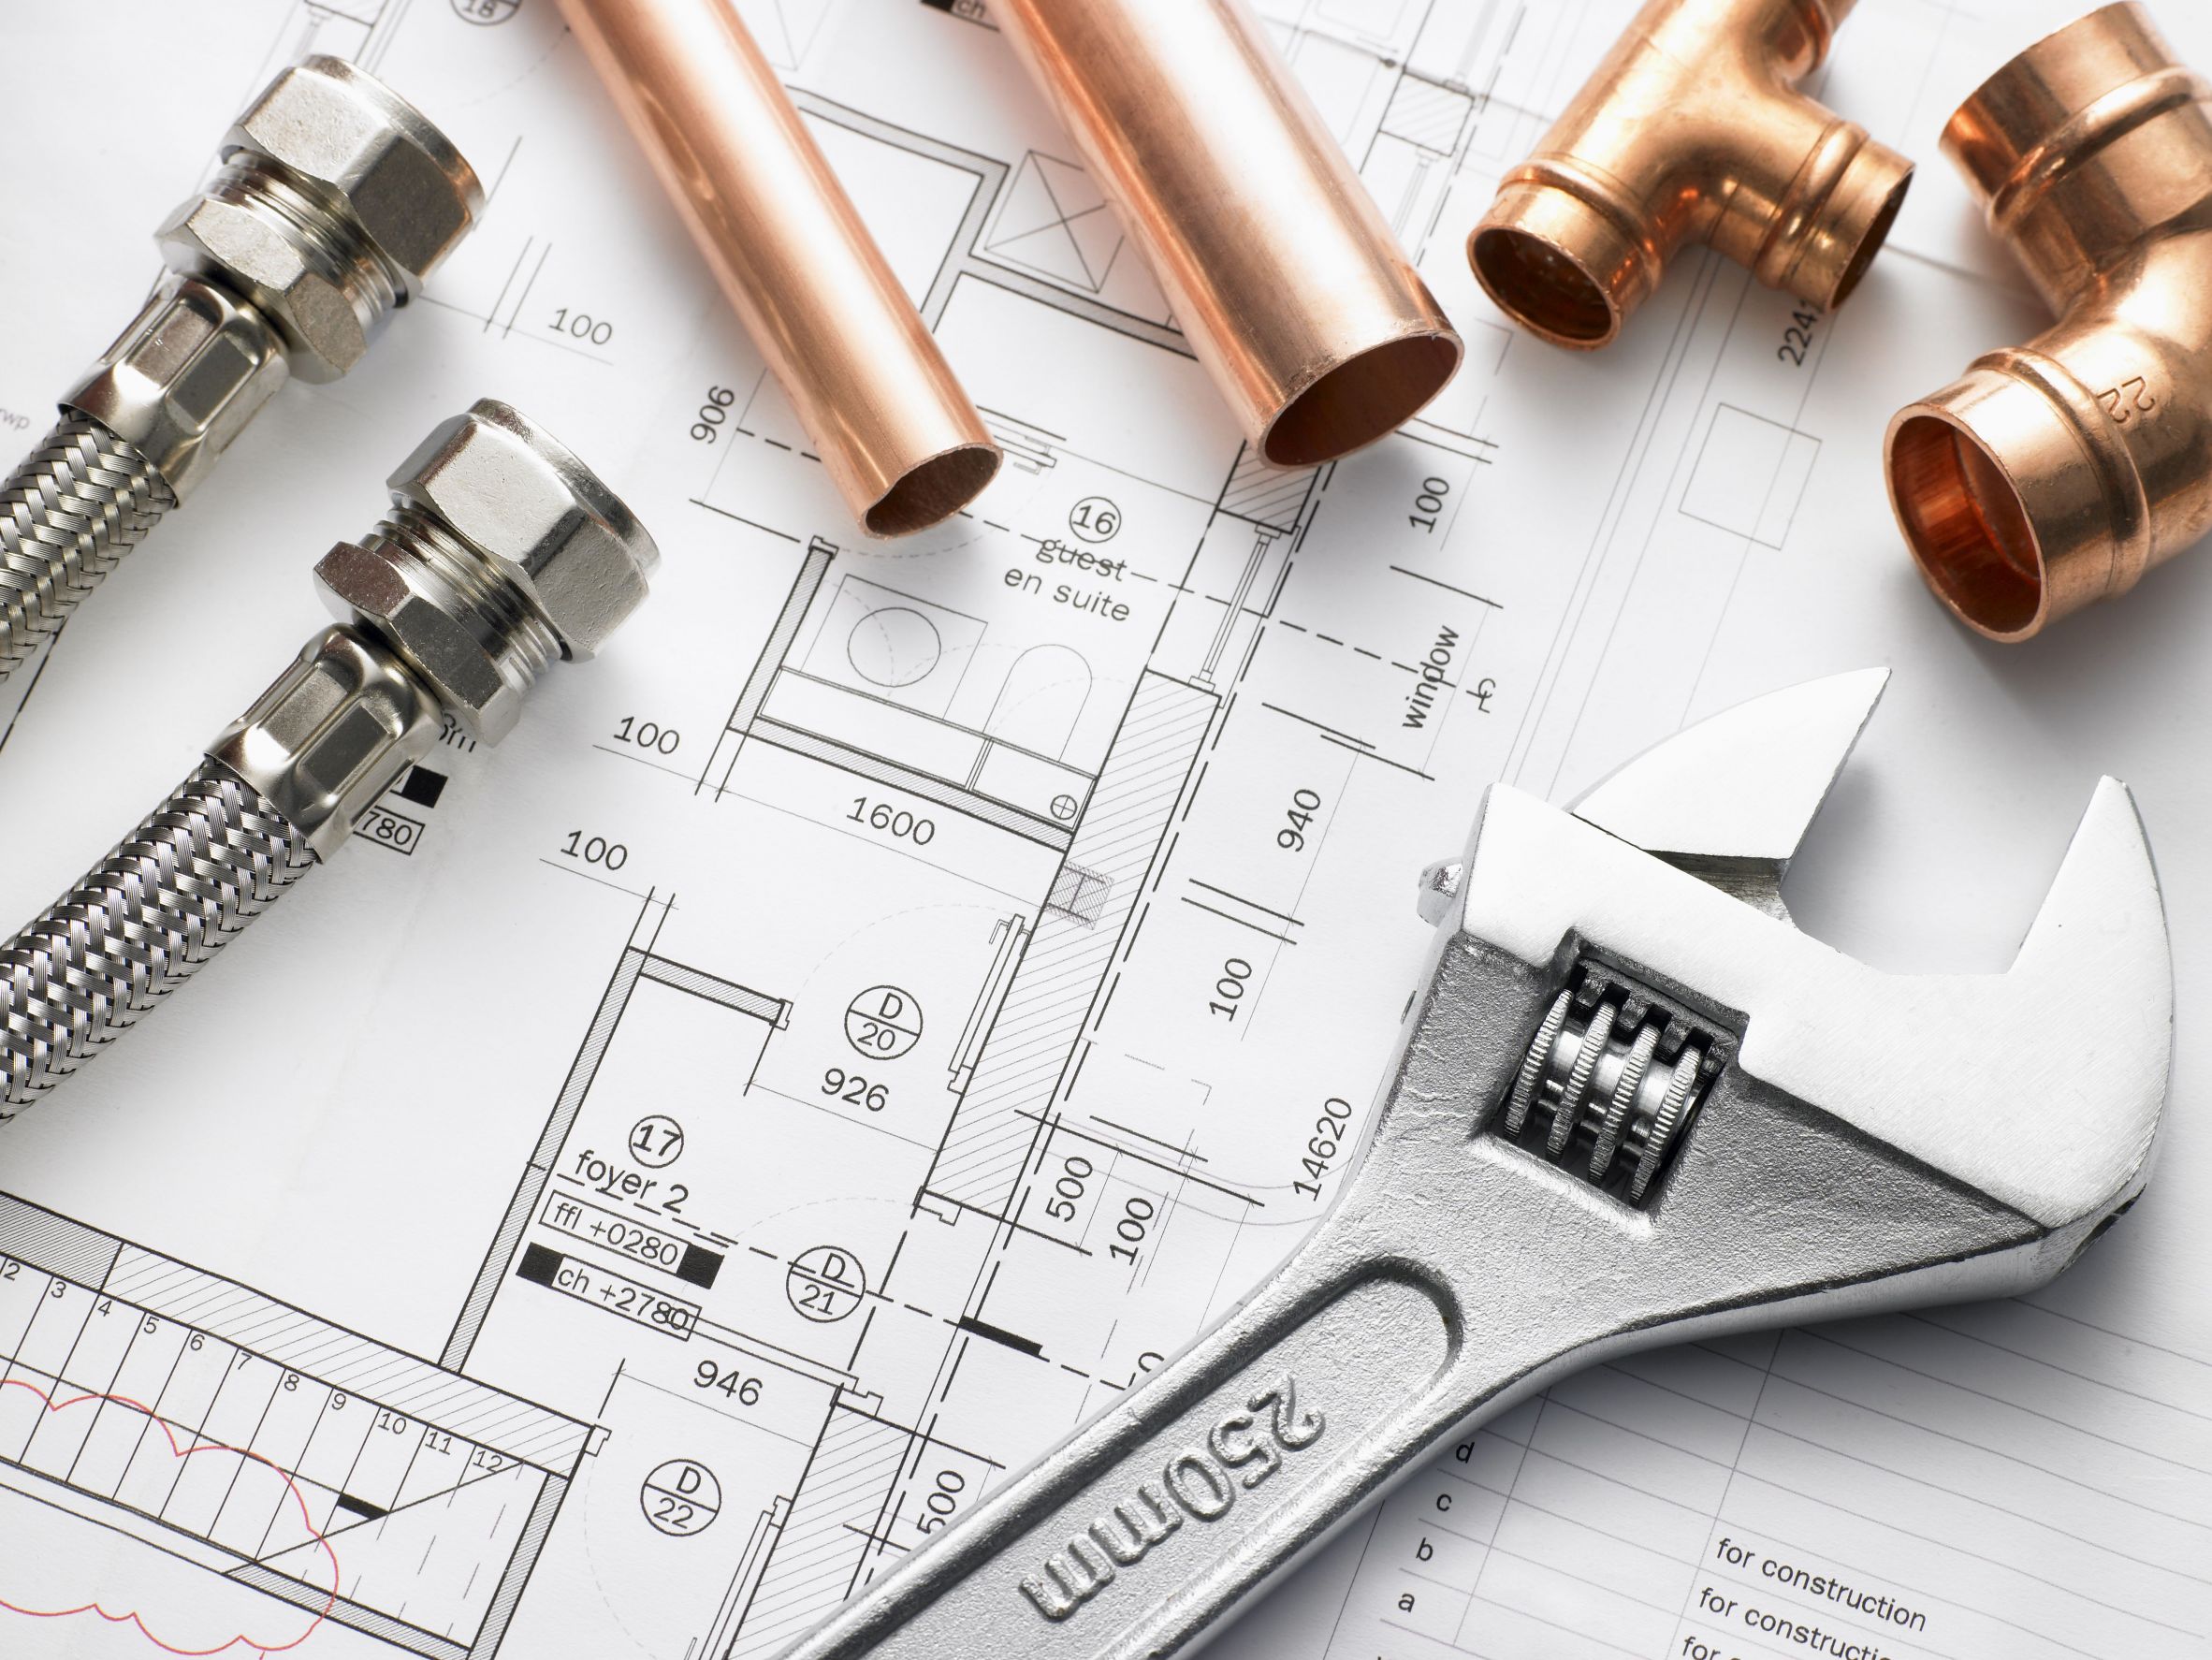 Get a Local Business to Take Care of Residential Plumbing in Cleveland, OH At a Fair Price